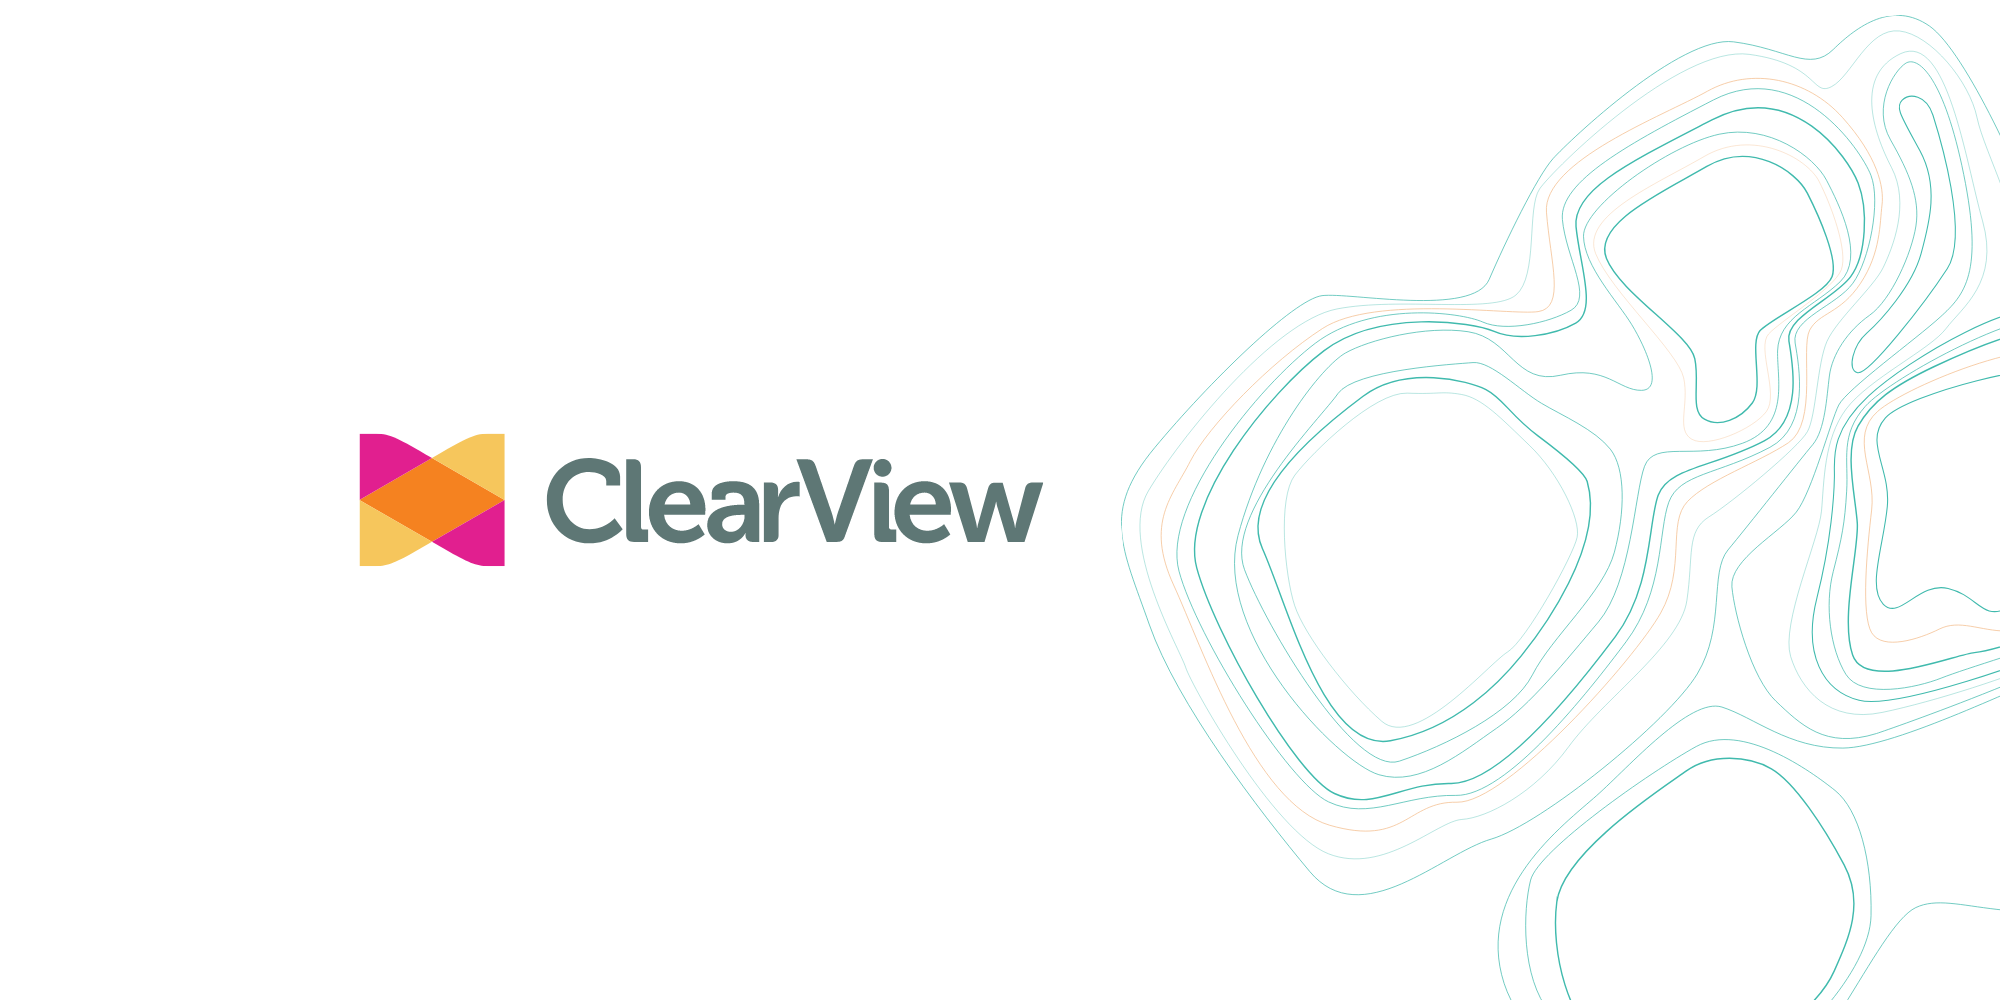 Blog post feature image - ClearView logo